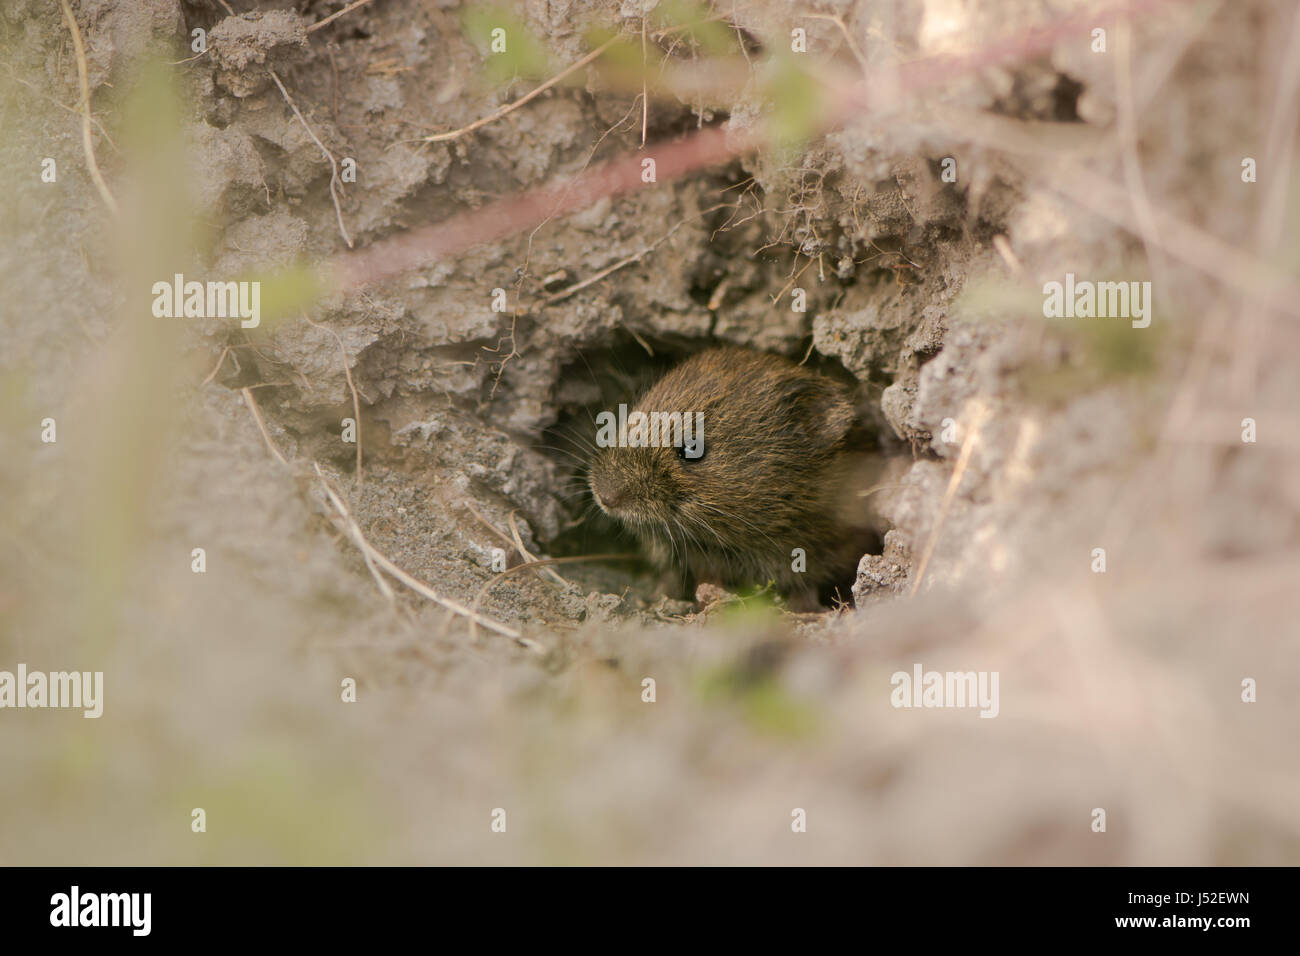 Field vole (Microtus agrestis) emerging from hole. A small mammal in the family Cricetidae leaving burrow under ant-hill Stock Photo